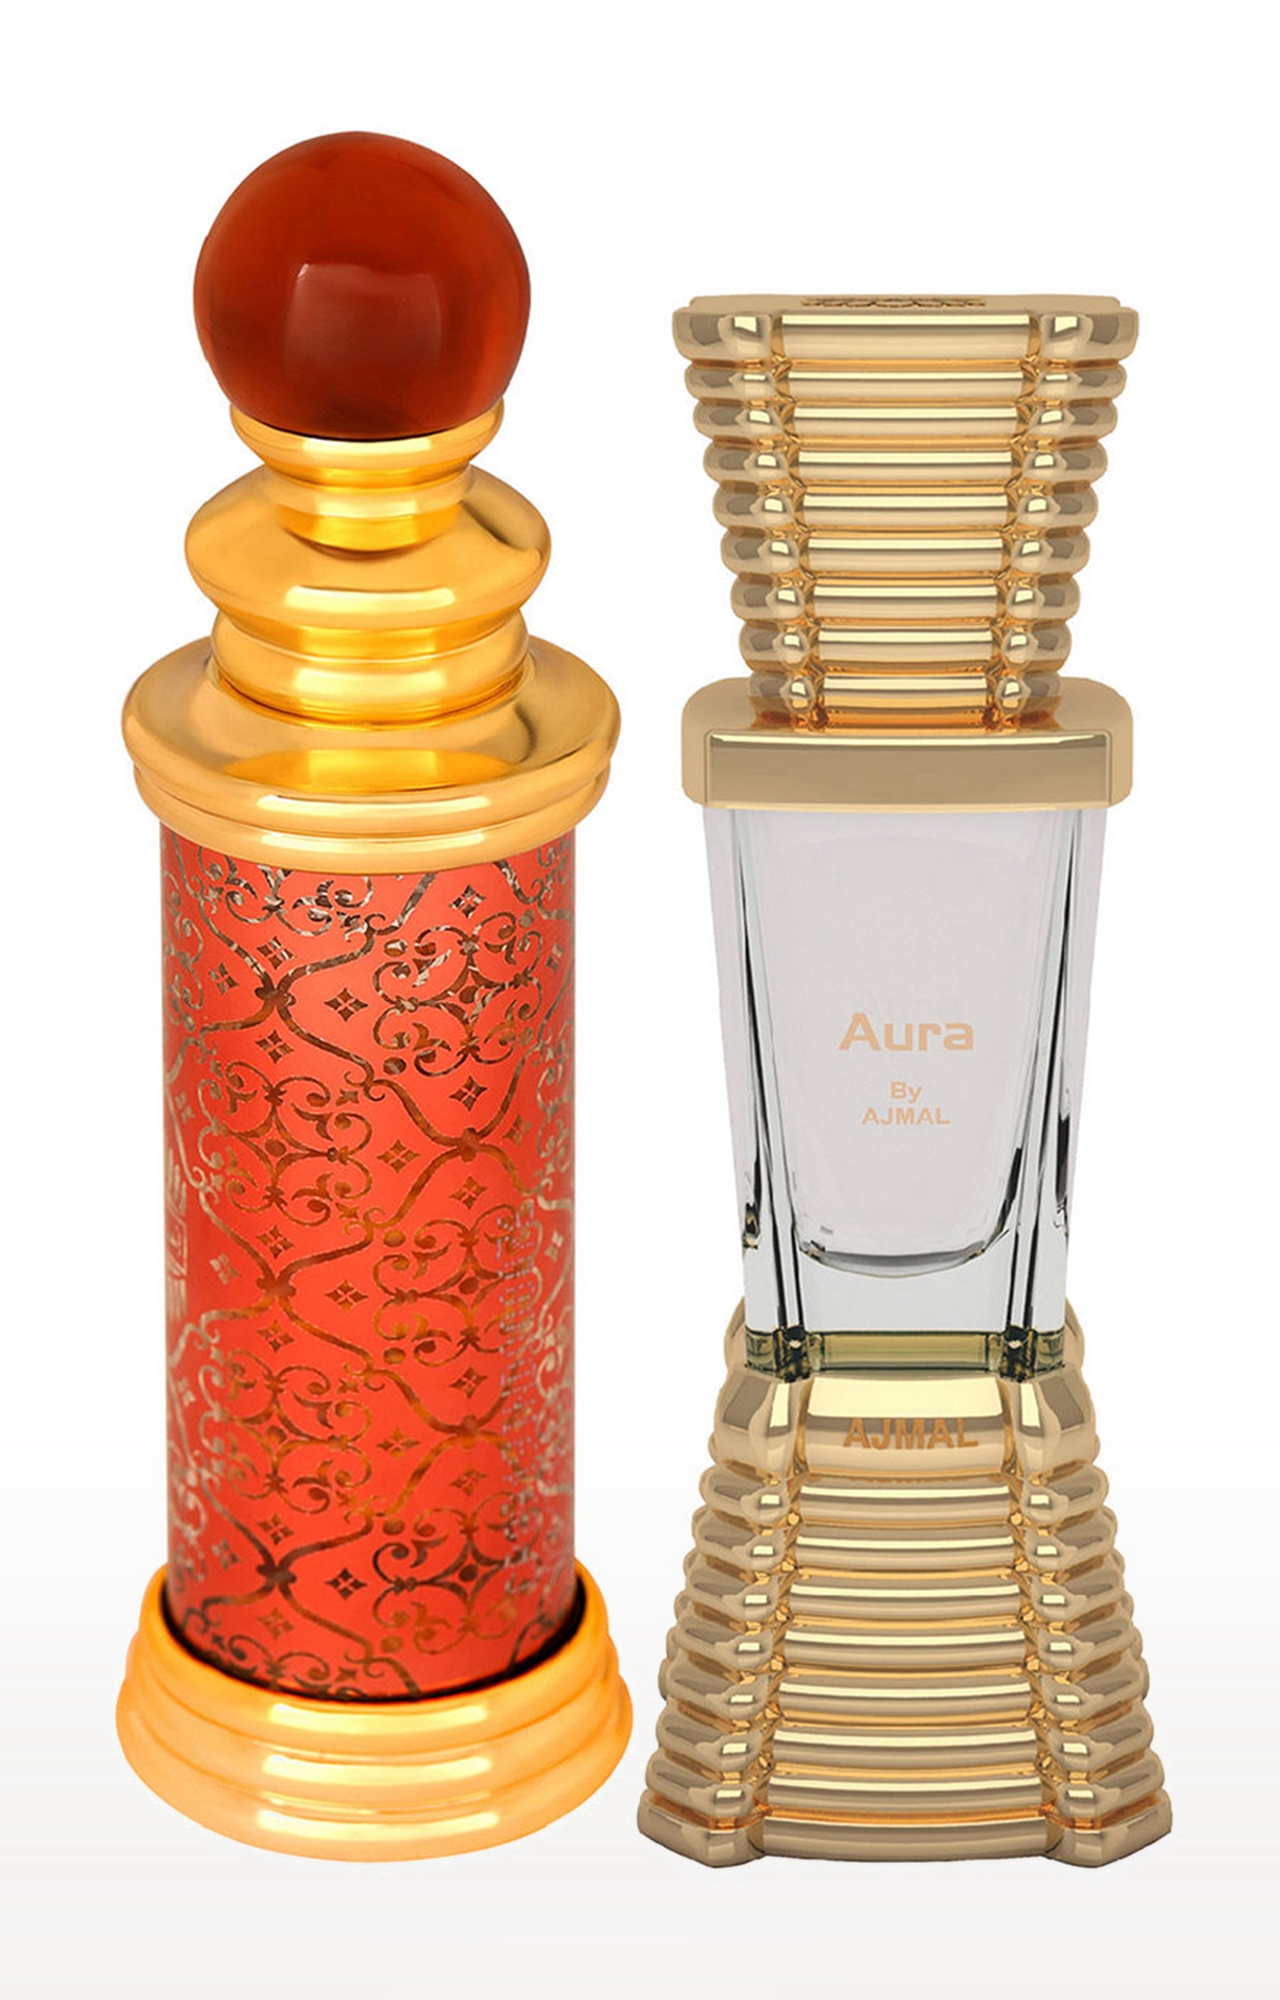 Ajmal | Ajmal Classic Oud Concentrated Perfume Oil Oudh Alcohol-free Attar 10ml for Unisex and Aura Concentrated Perfume Oil Alcohol-free Attar 10ml for Unisex 0